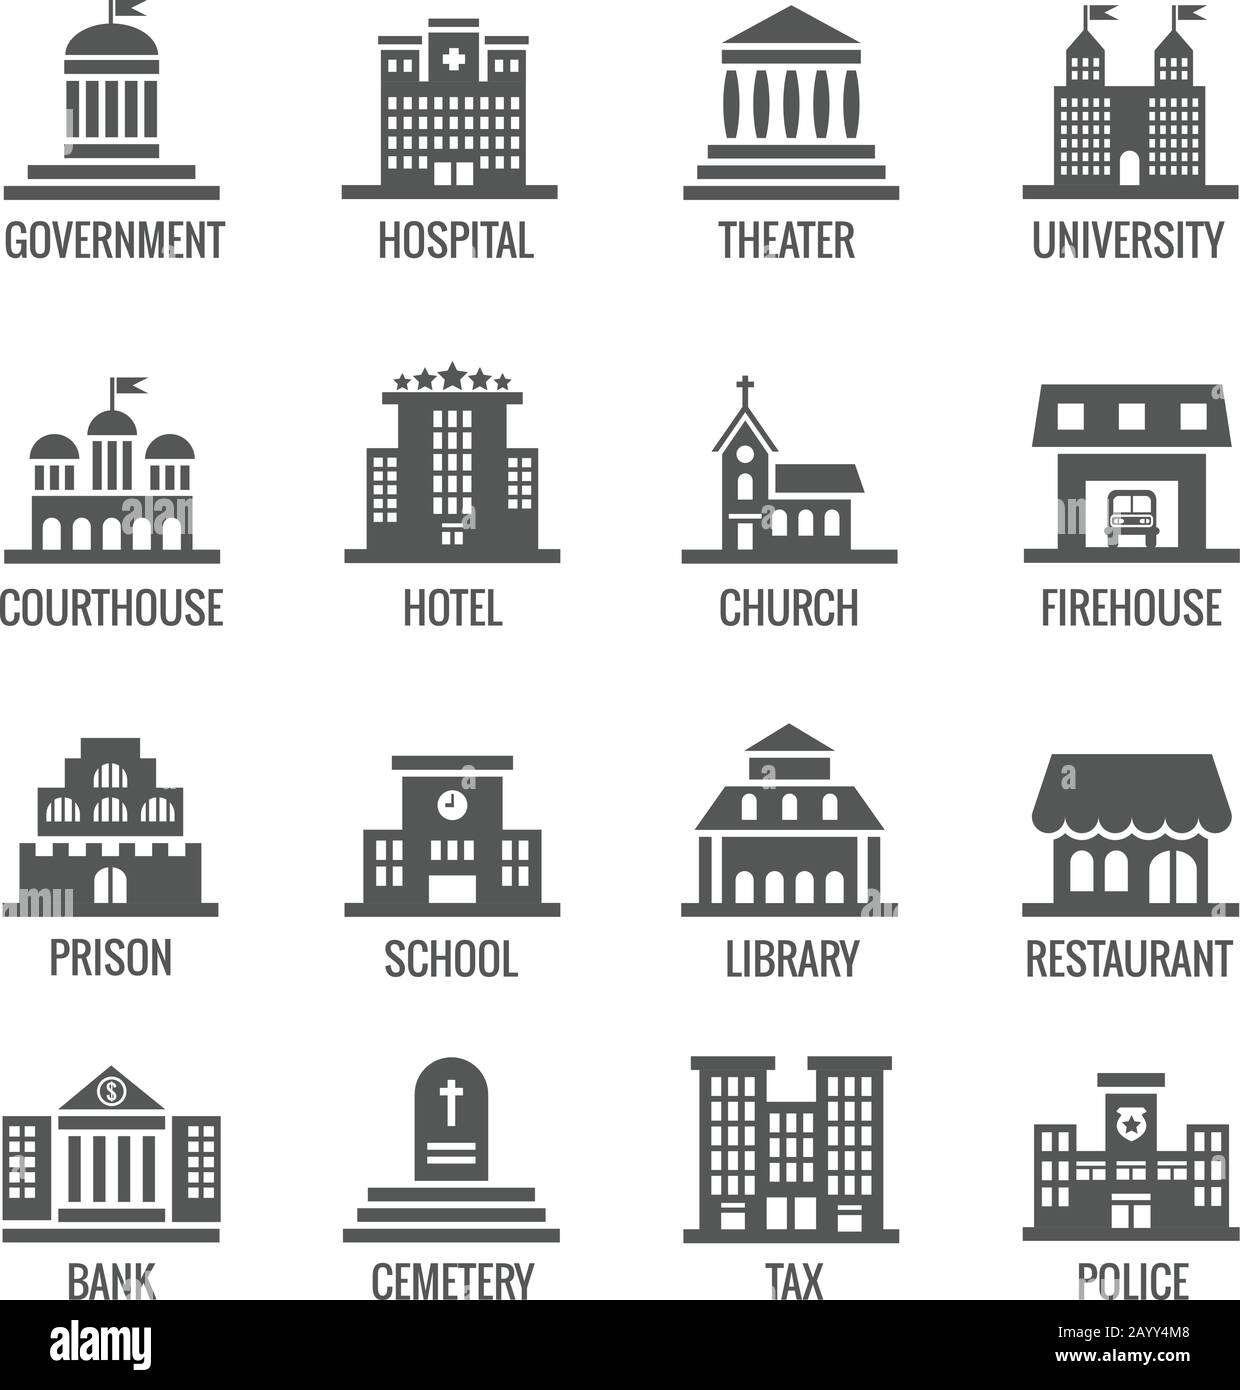 Government, public building vector icons set. Building icon set public and architecture building government city illustration Stock Vector